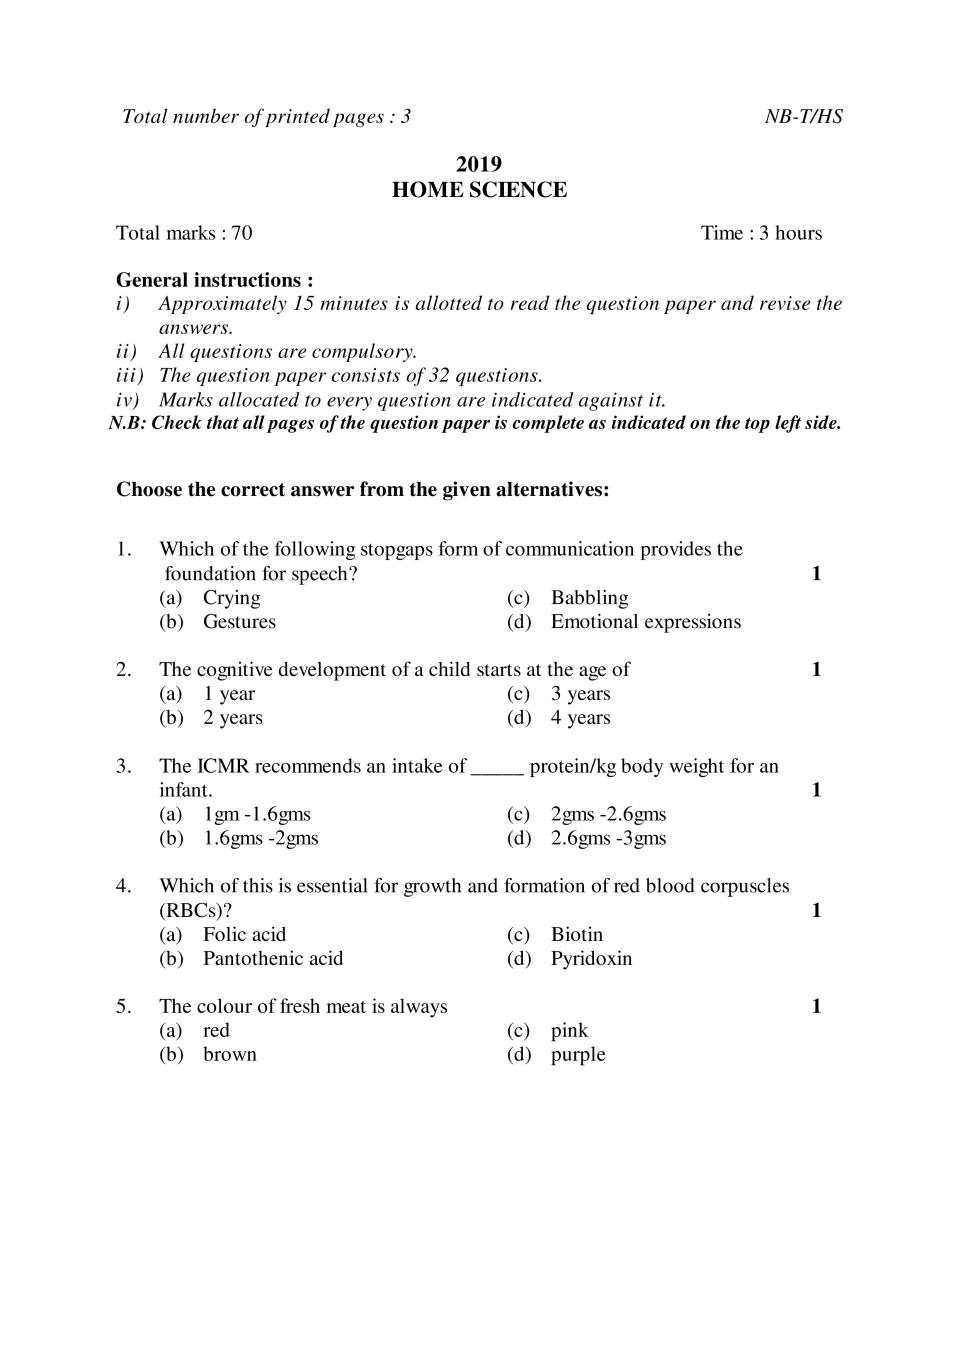 NBSE Class 10 Question Paper 2019 for Home Science - Page 1